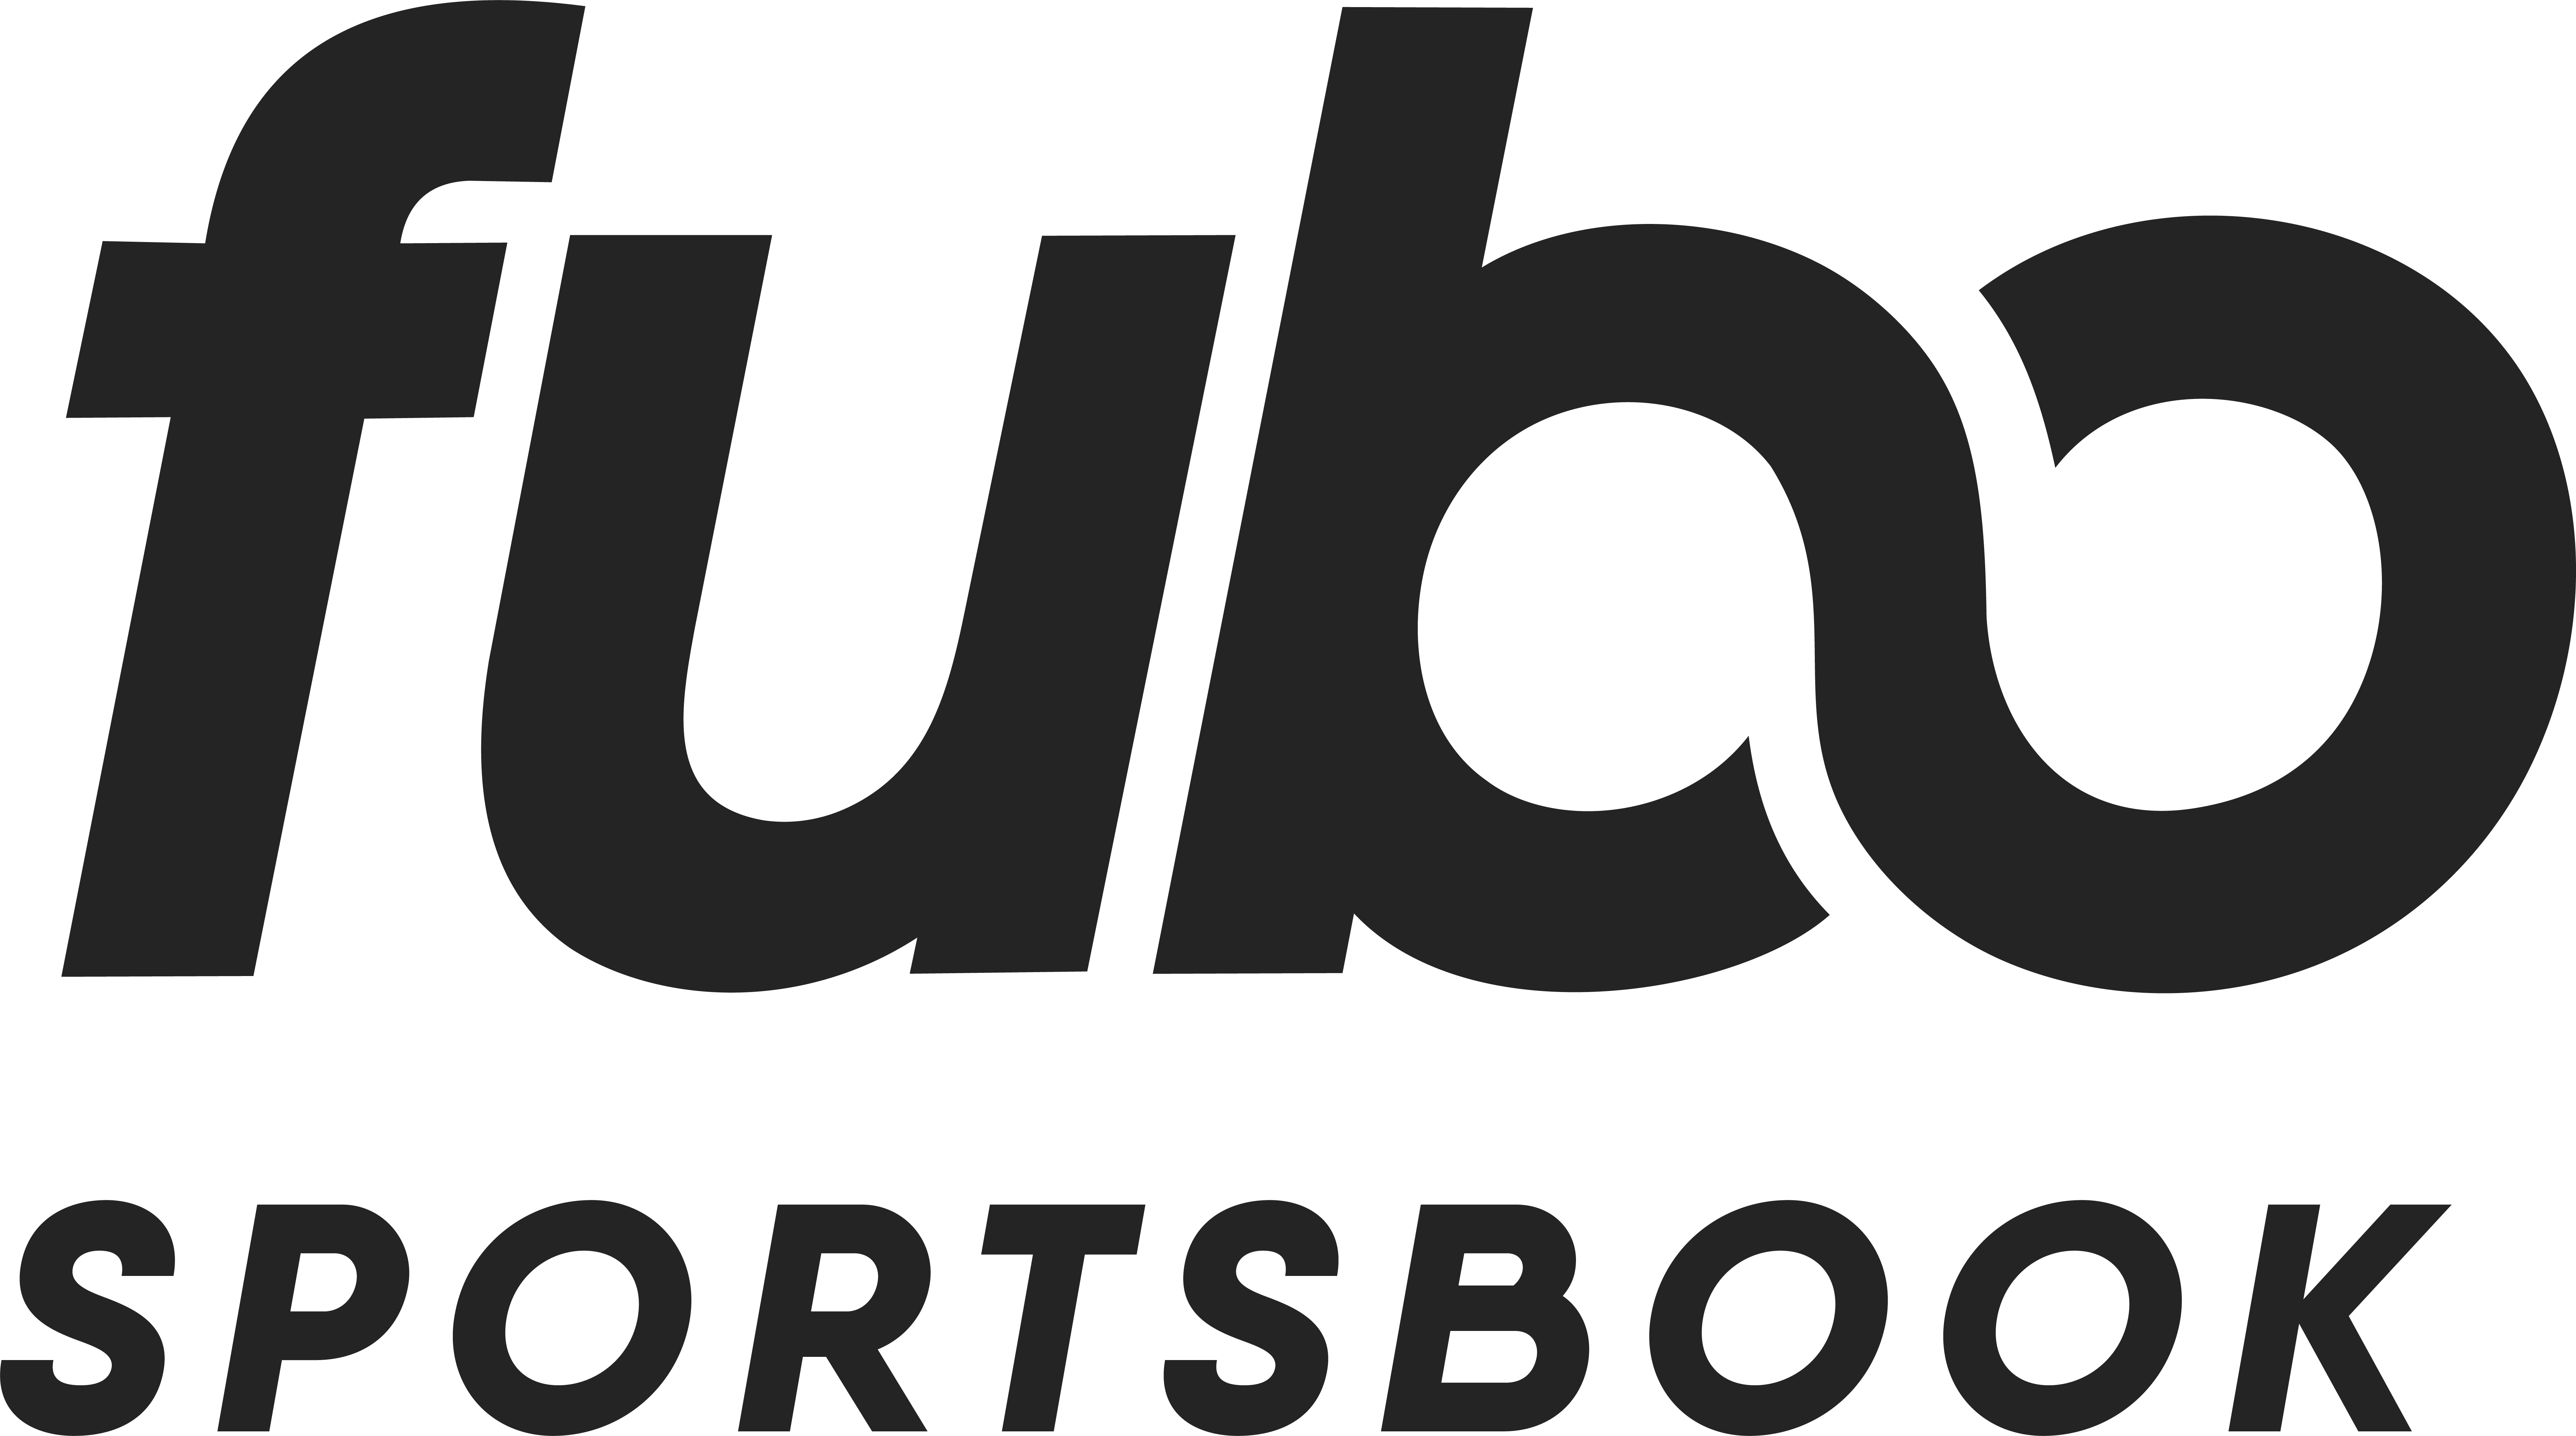 Fubo Sportsbook Officially Launches, Bringing First Owned-and-Operated Live TV Streaming-Integrated Mobile Sportsbook to Market in the United States Business Wire